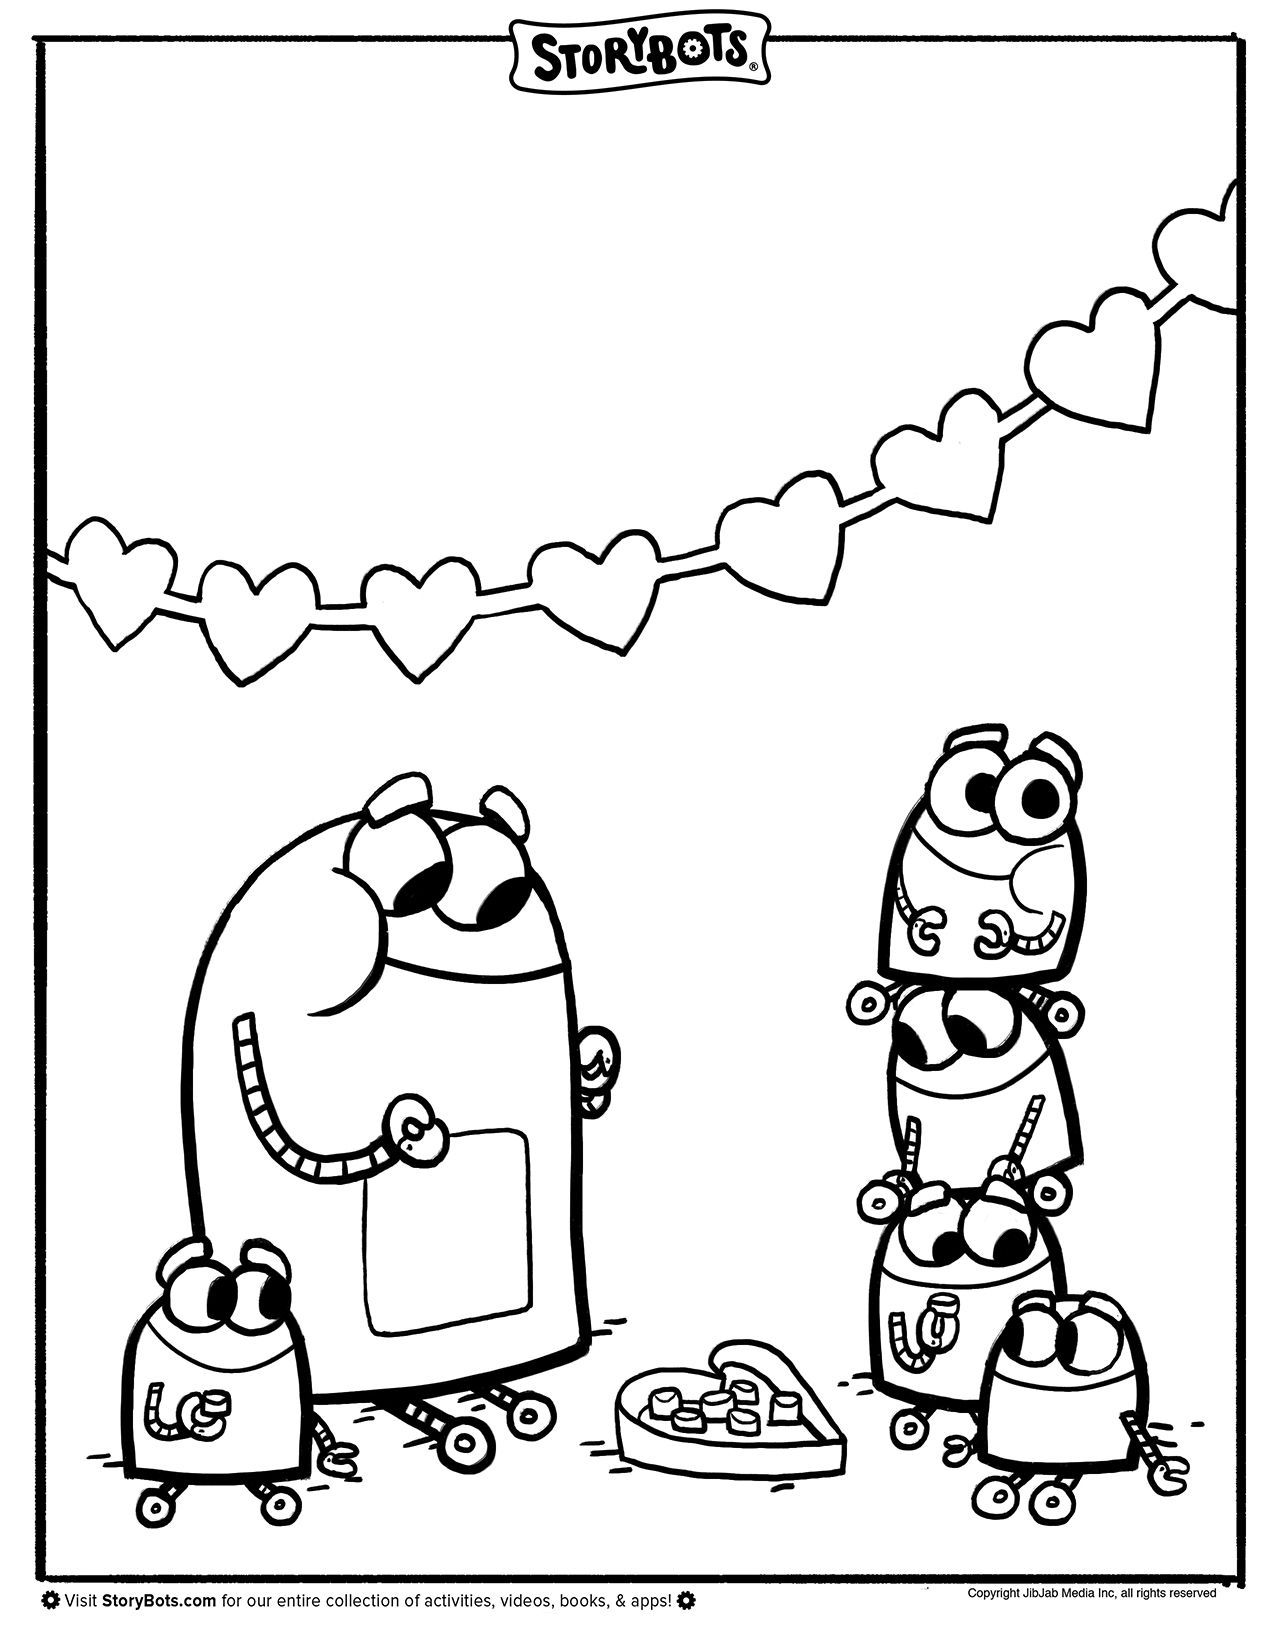 Cute Storybots Coloring Pages